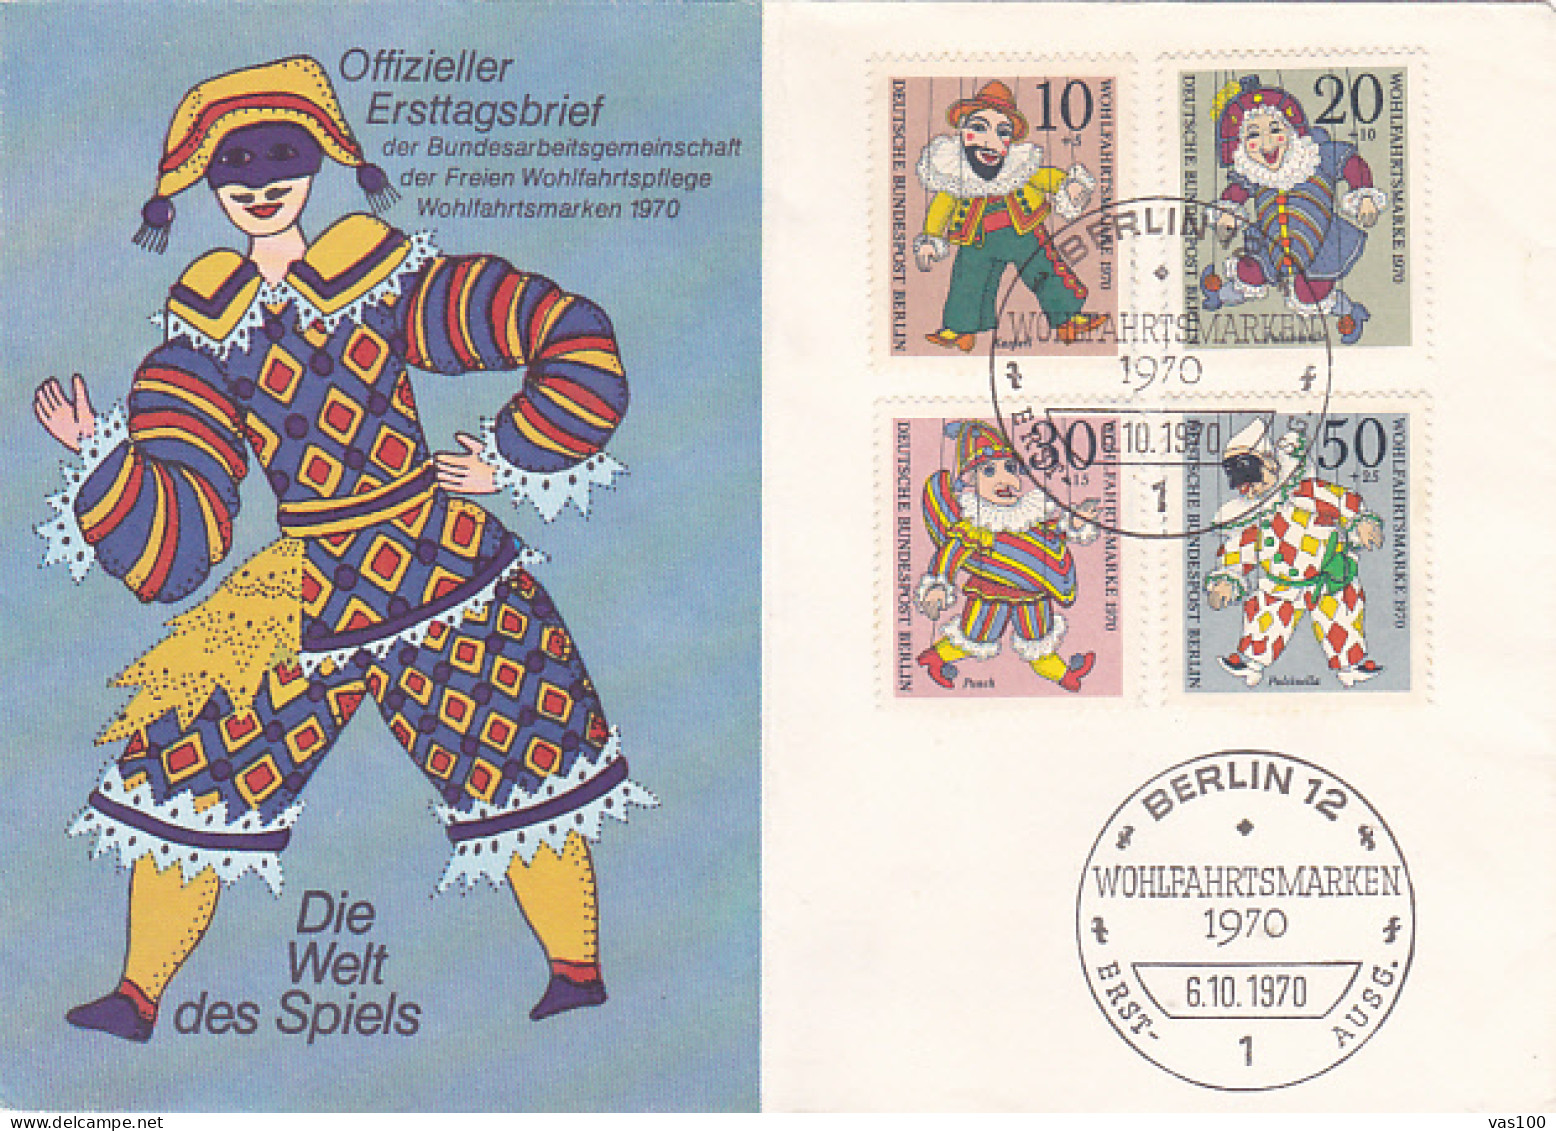 CHILDRENS, PUPPETS, CHARITY STAMPS, COVER FDC, 1970, GERMANY - Marionetten